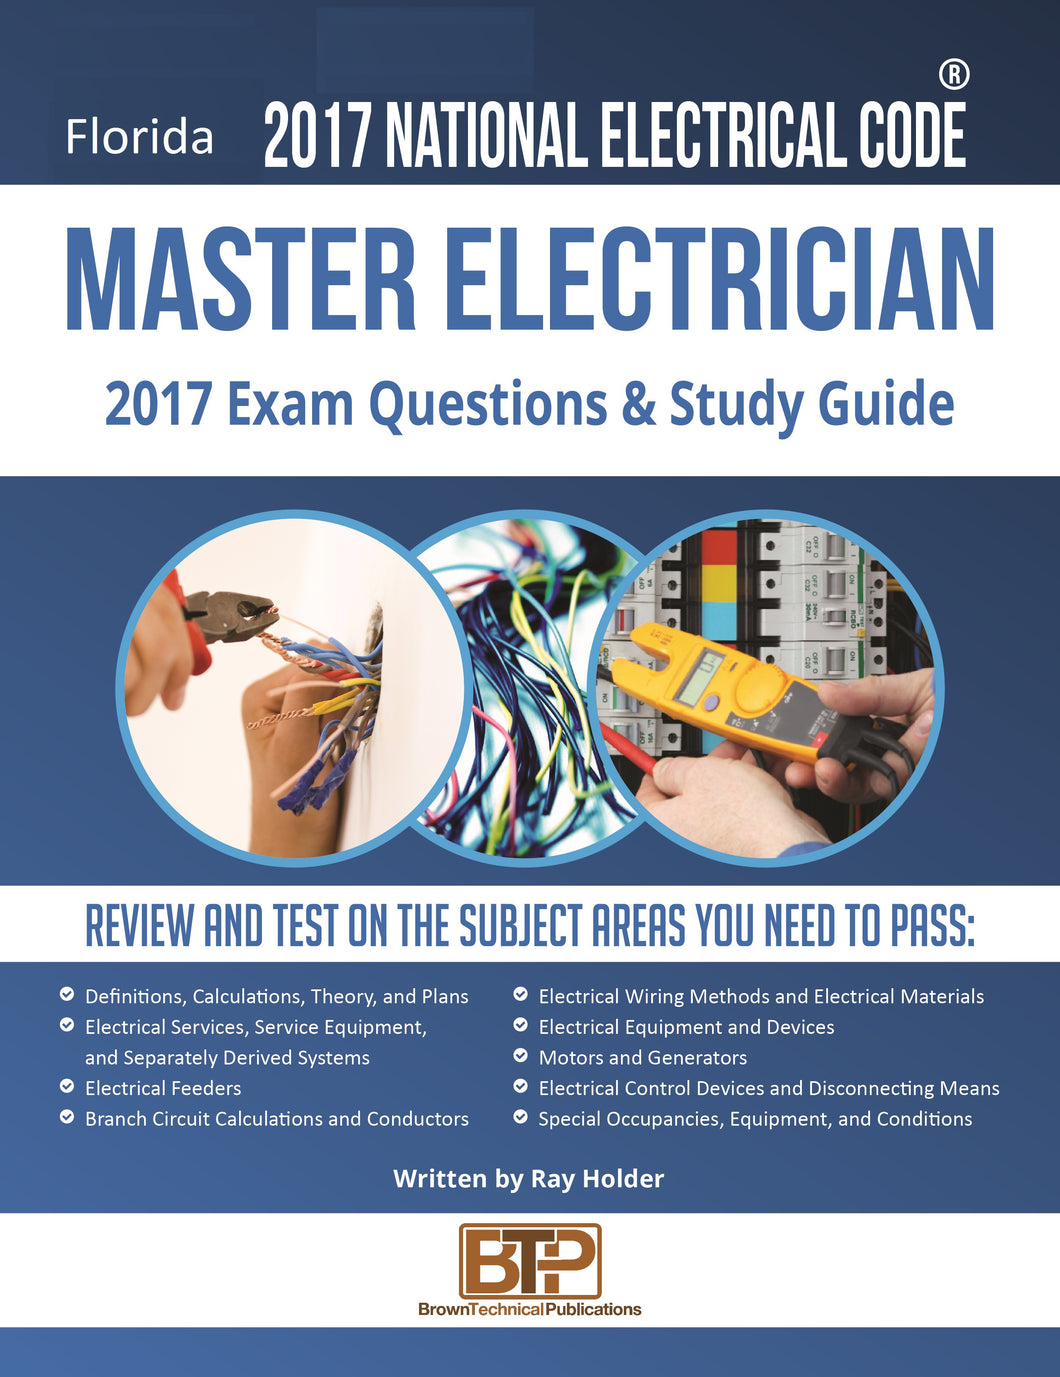 Florida 2017 Master Electrician Study Guide